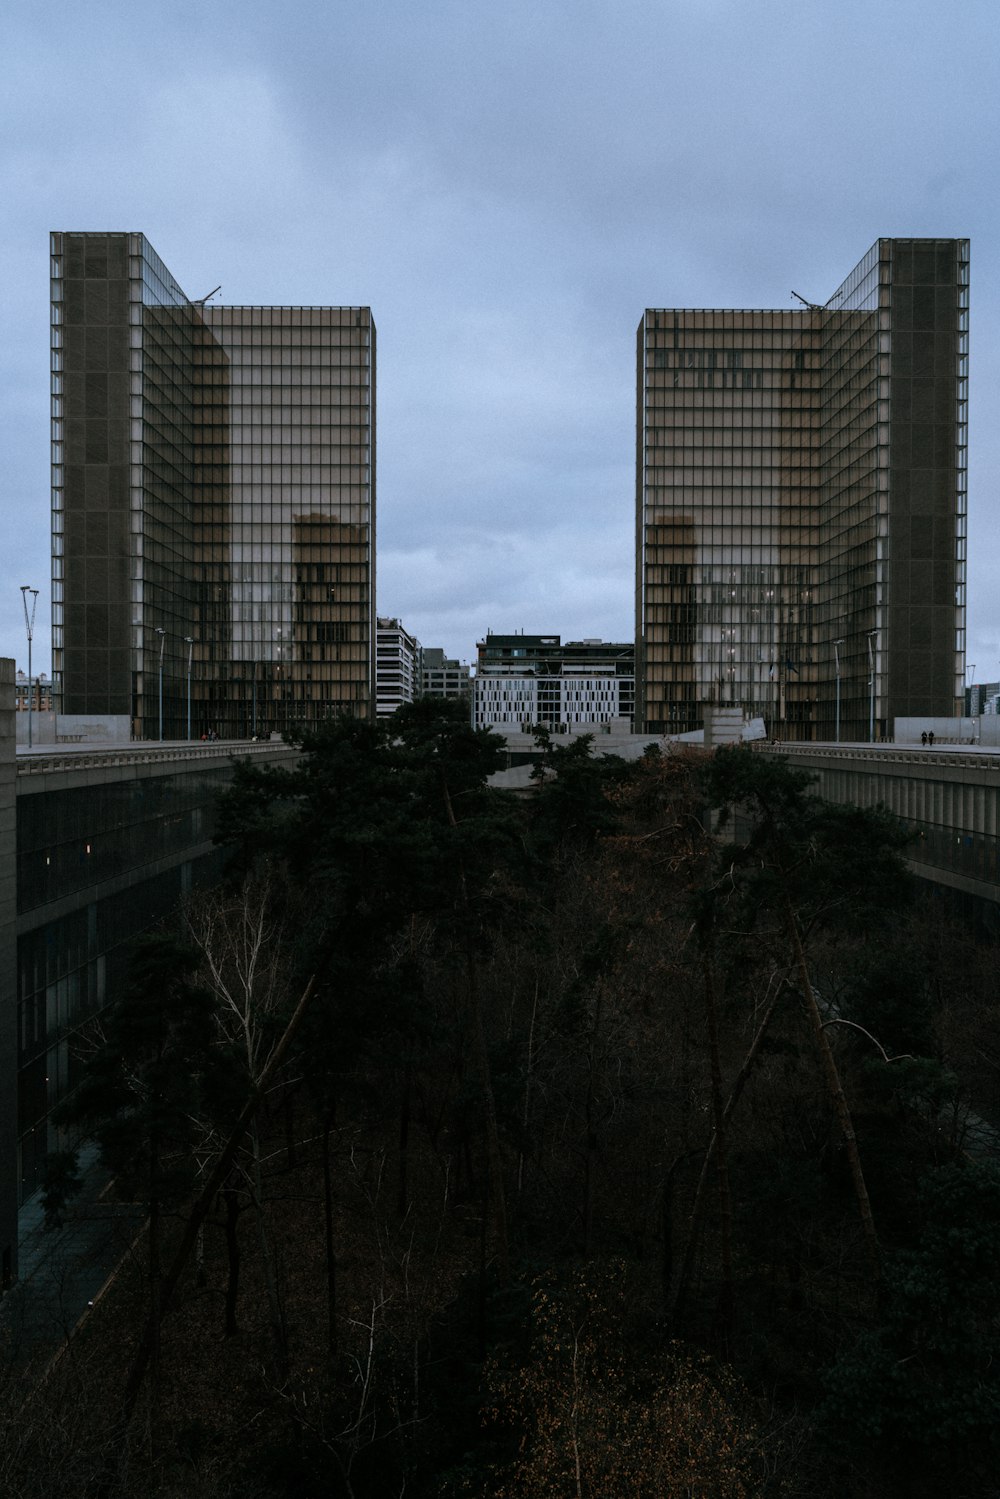 trees surrounded by building during daytime